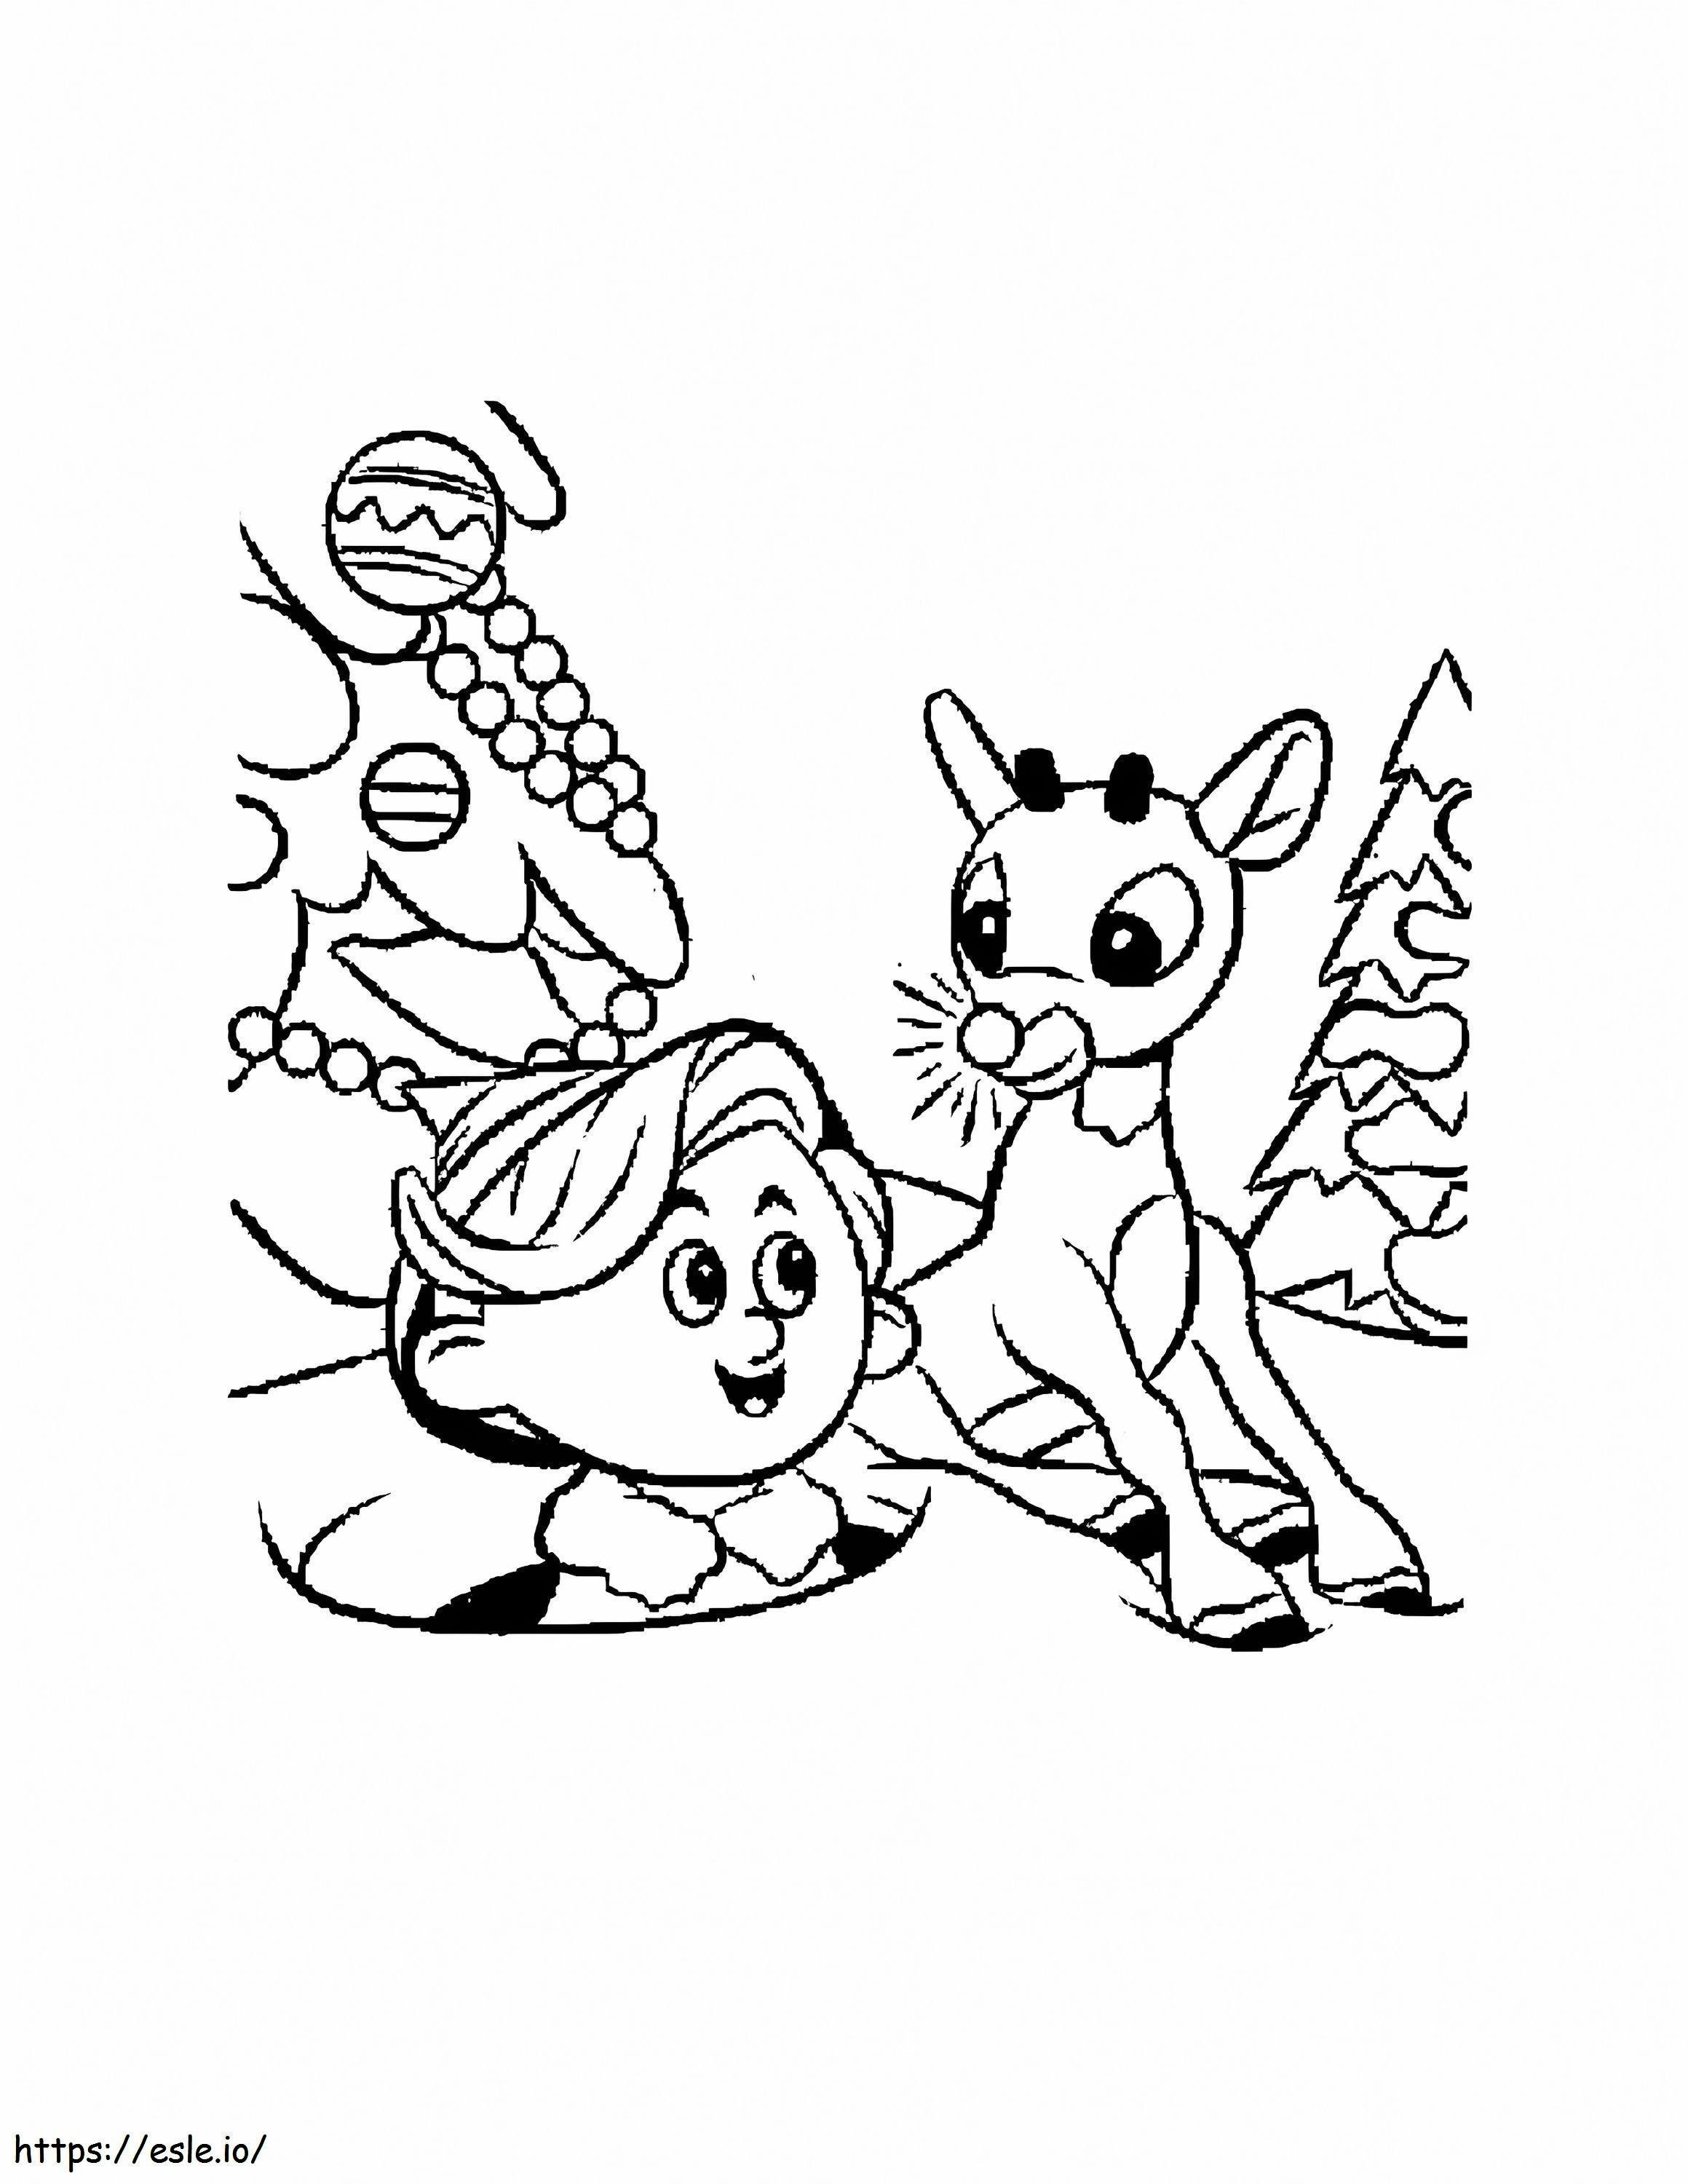 1582339654 Rudolph Hermie The Dentist And Rudolph Just Their Faces Would Look Cute 850X1100 2 coloring page